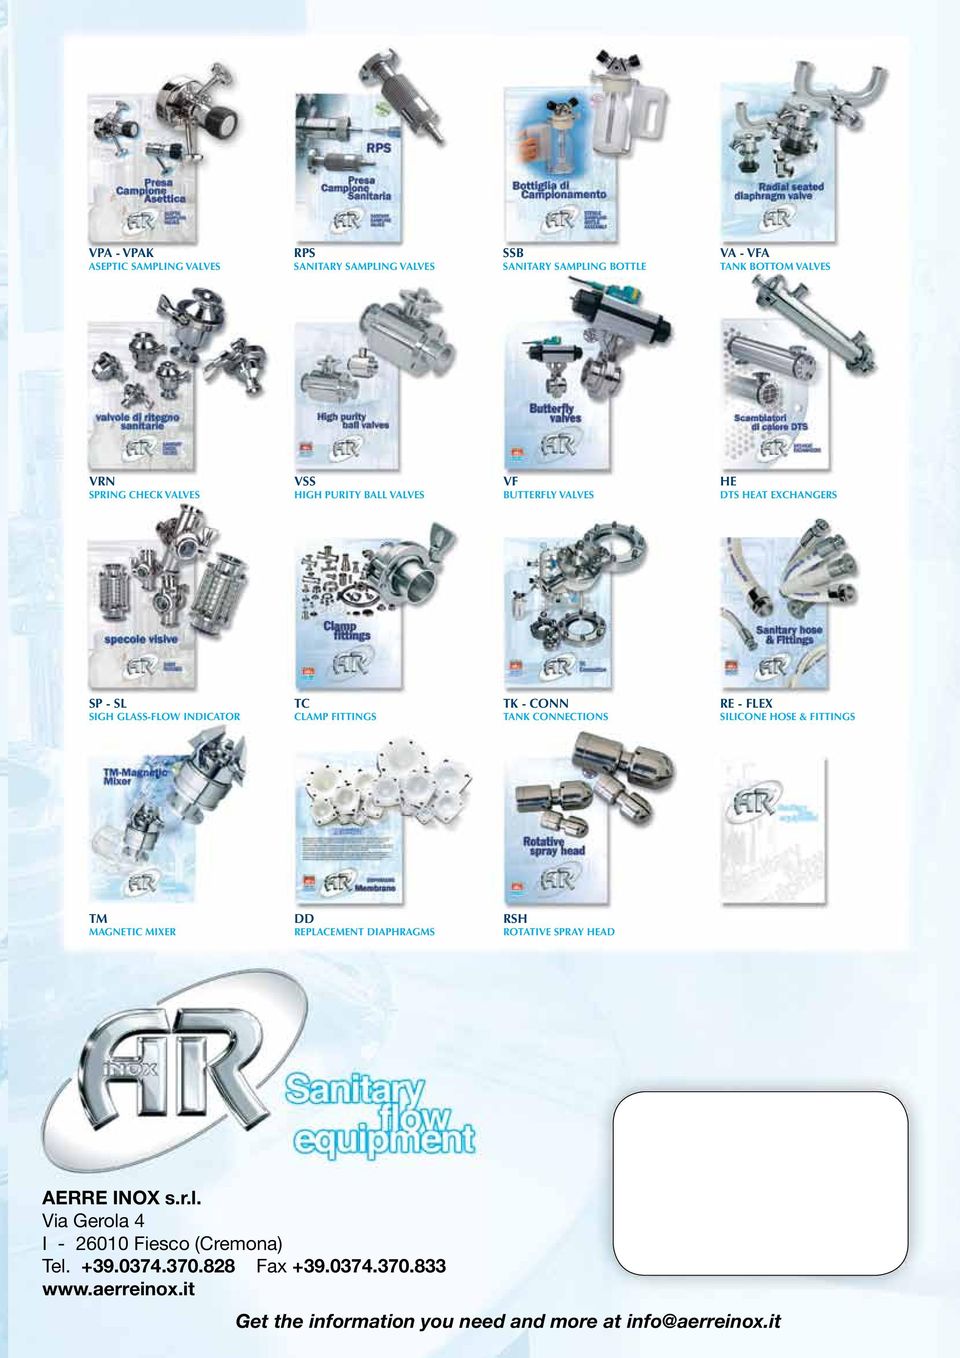 TANK CONNECTIONS RE - FLEX SILICONE HOSE & FITTINGS TM MAGNETIC MIXER DD REPLACEMENT DIAPHRAGMS RSH ROTATIVE SPRAY HEAD AERRE INOX s.r.l.